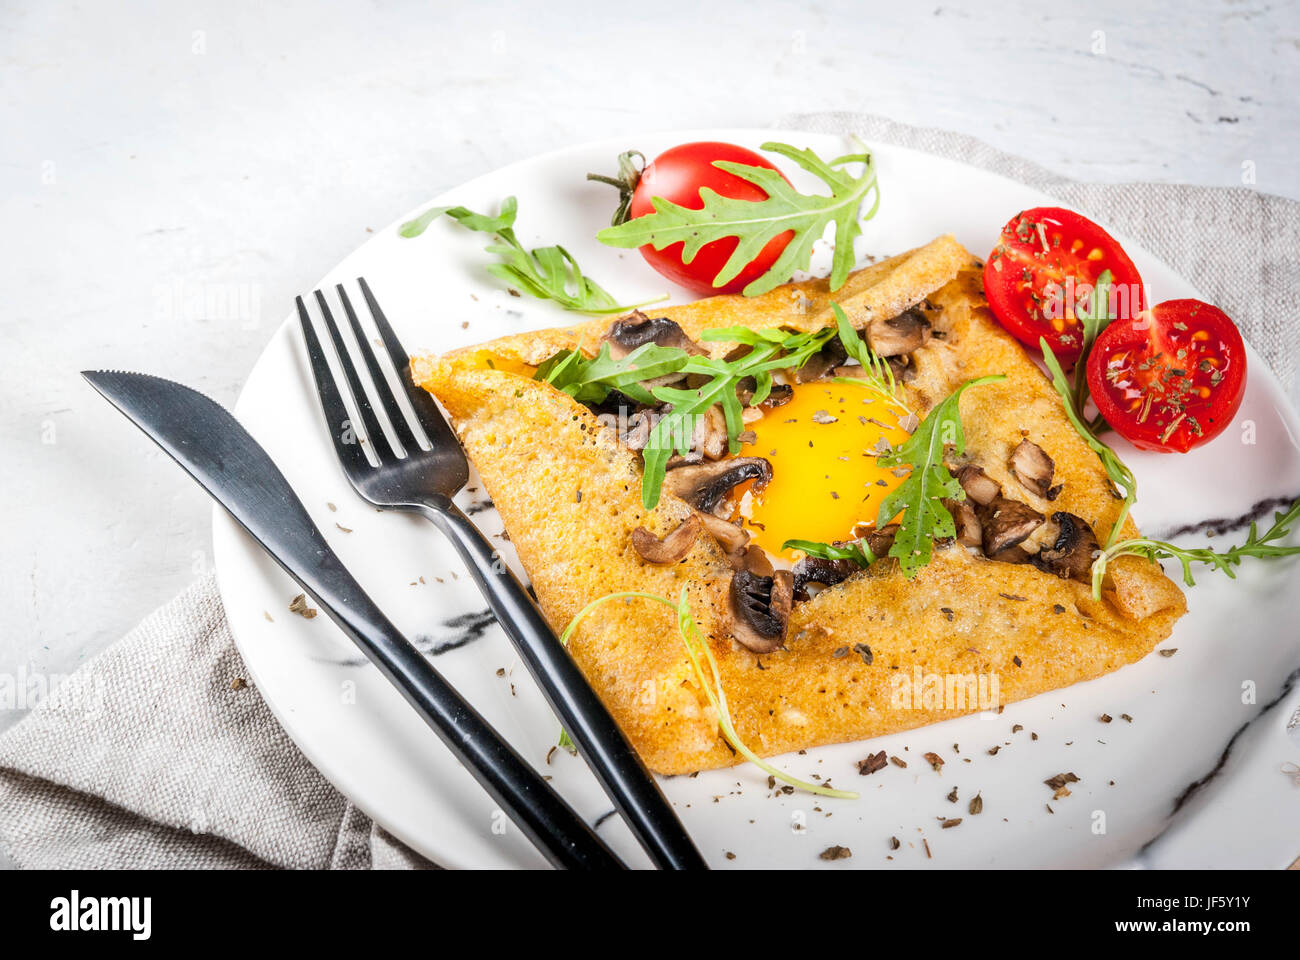 French cuisine. Breakfast, lunch, snacks. Vegan food. Traditional dish galette sarrasin. Crepes with eggs, cheese, fried mushrooms, arugula leaves and Stock Photo